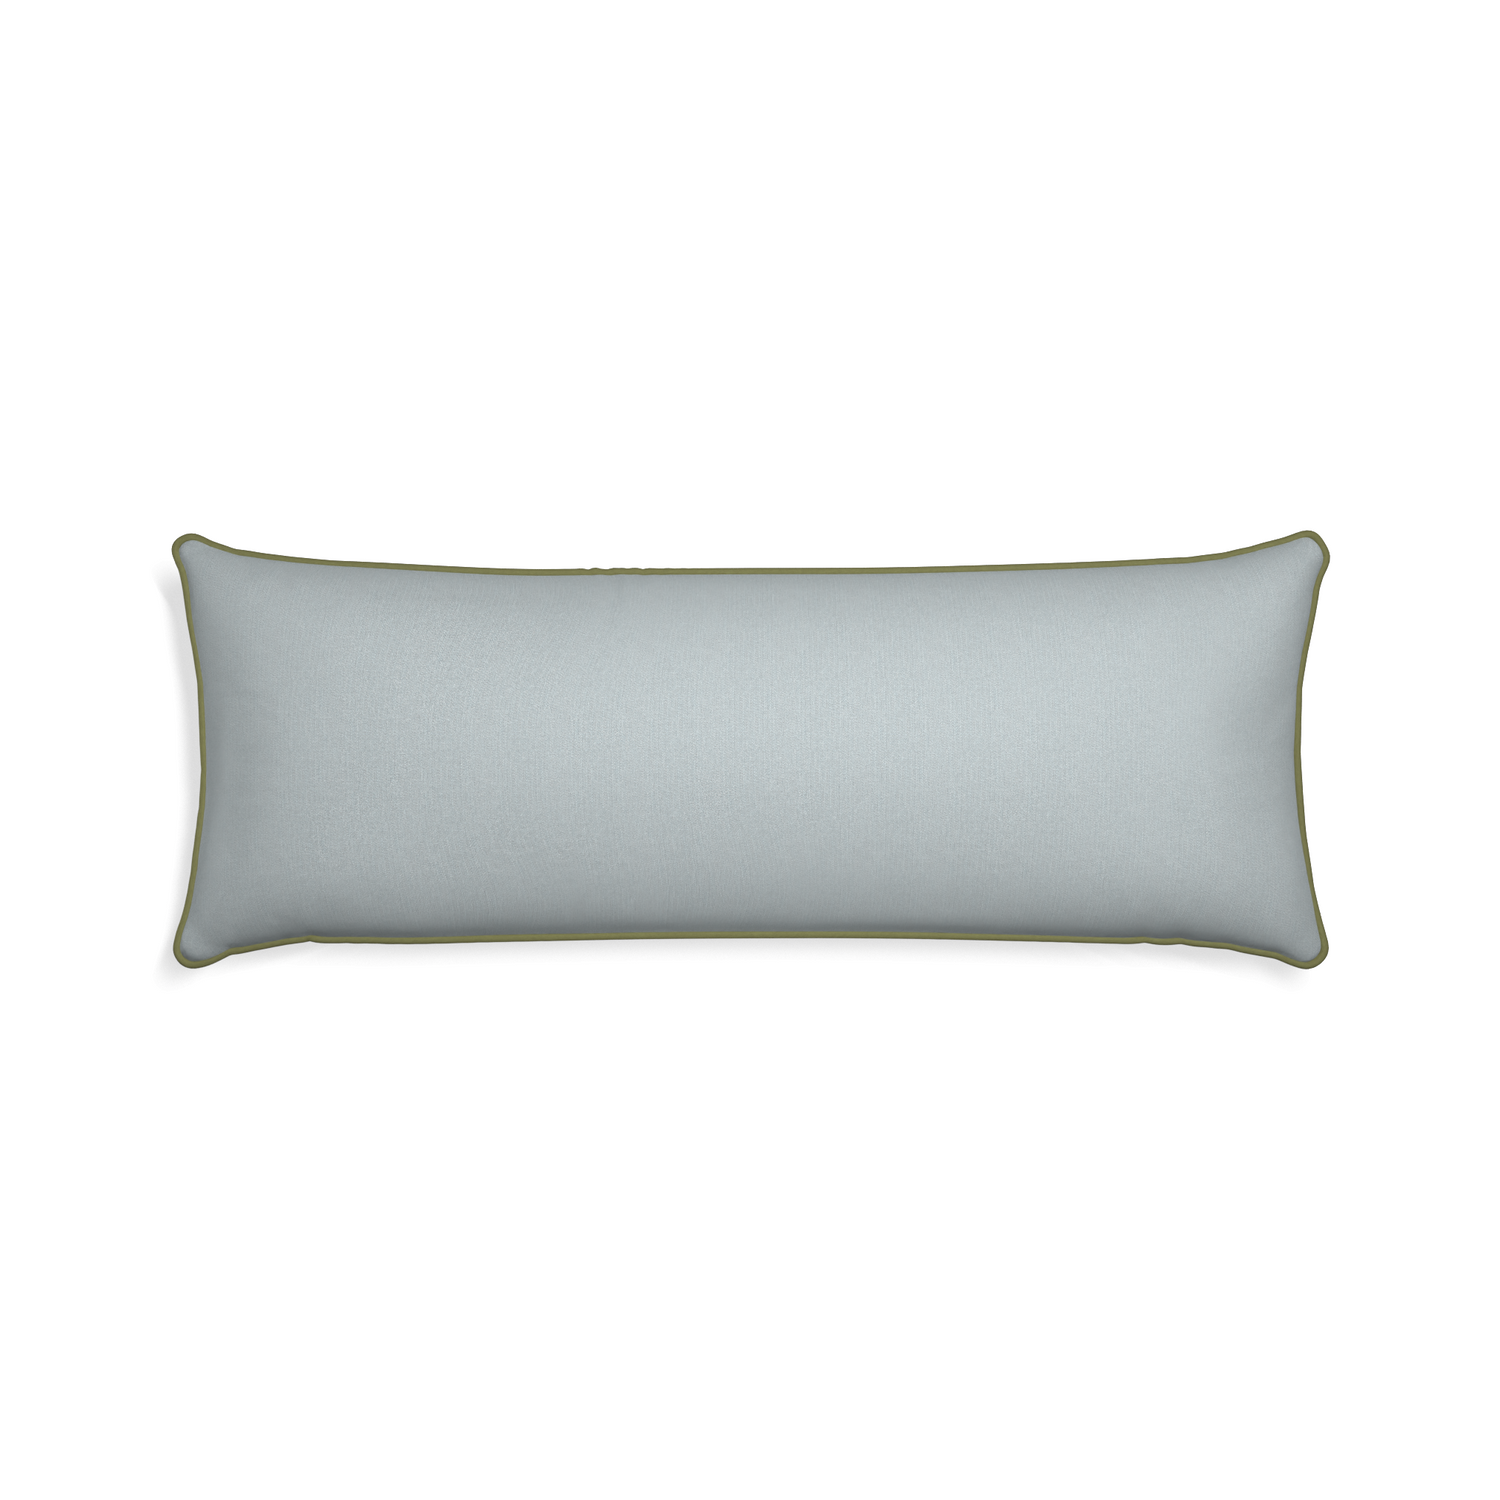 Xl-lumbar sea custom grey bluepillow with moss piping on white background